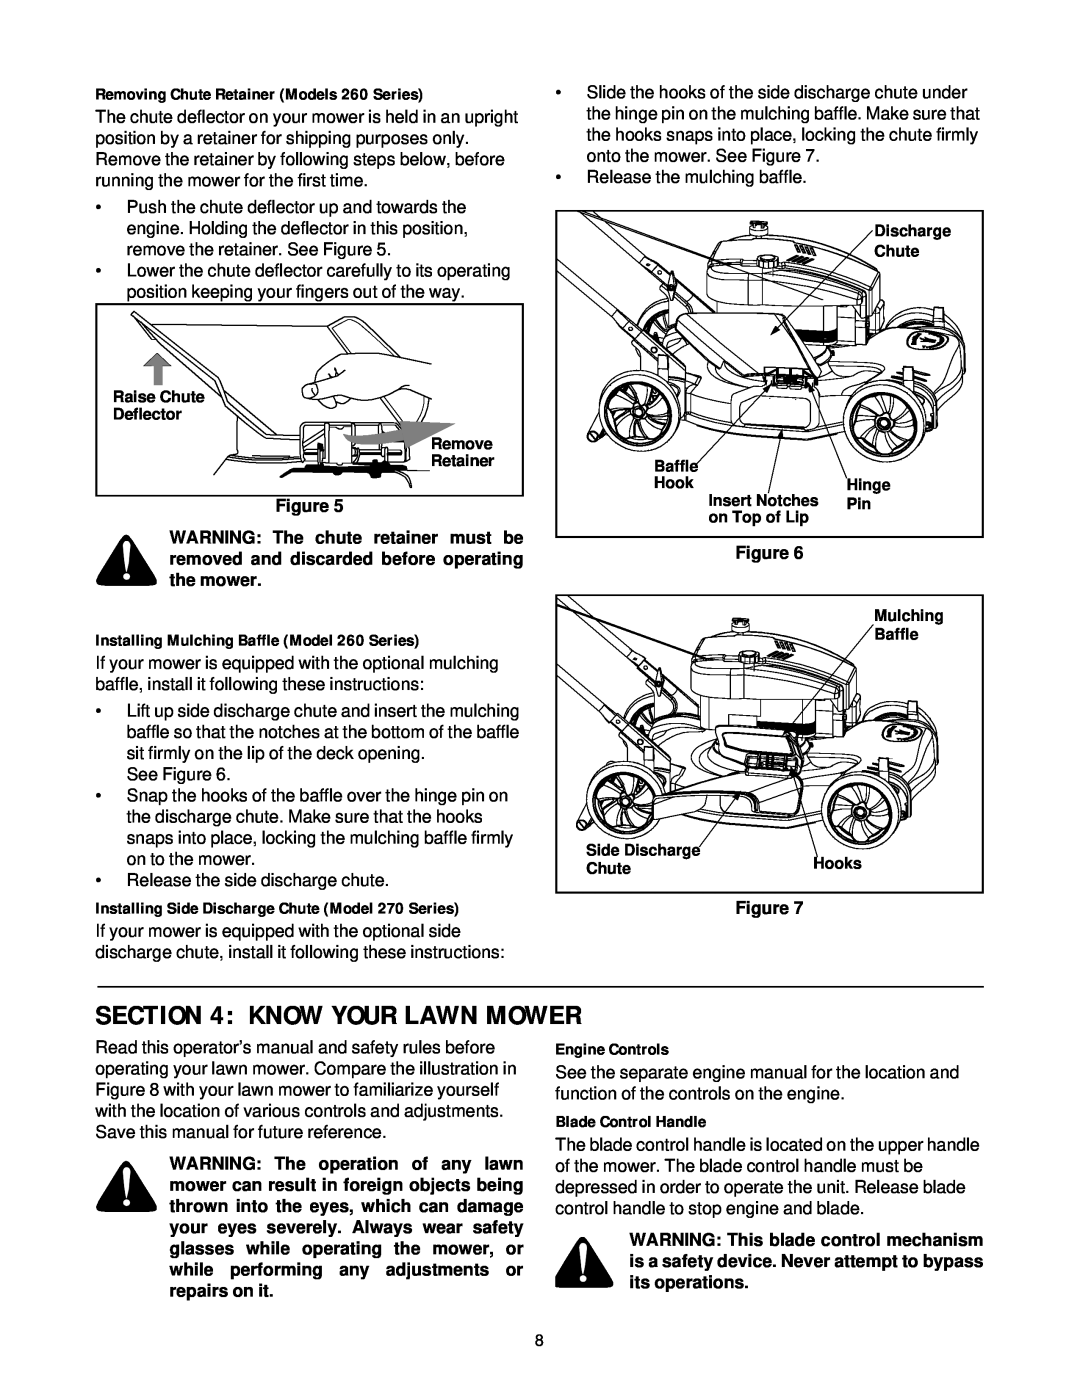 MTD 260 Thru 279 Know Your Lawn Mower, Removing Chute Retainer Models 260 Series, Engine Controls, Blade Control Handle 